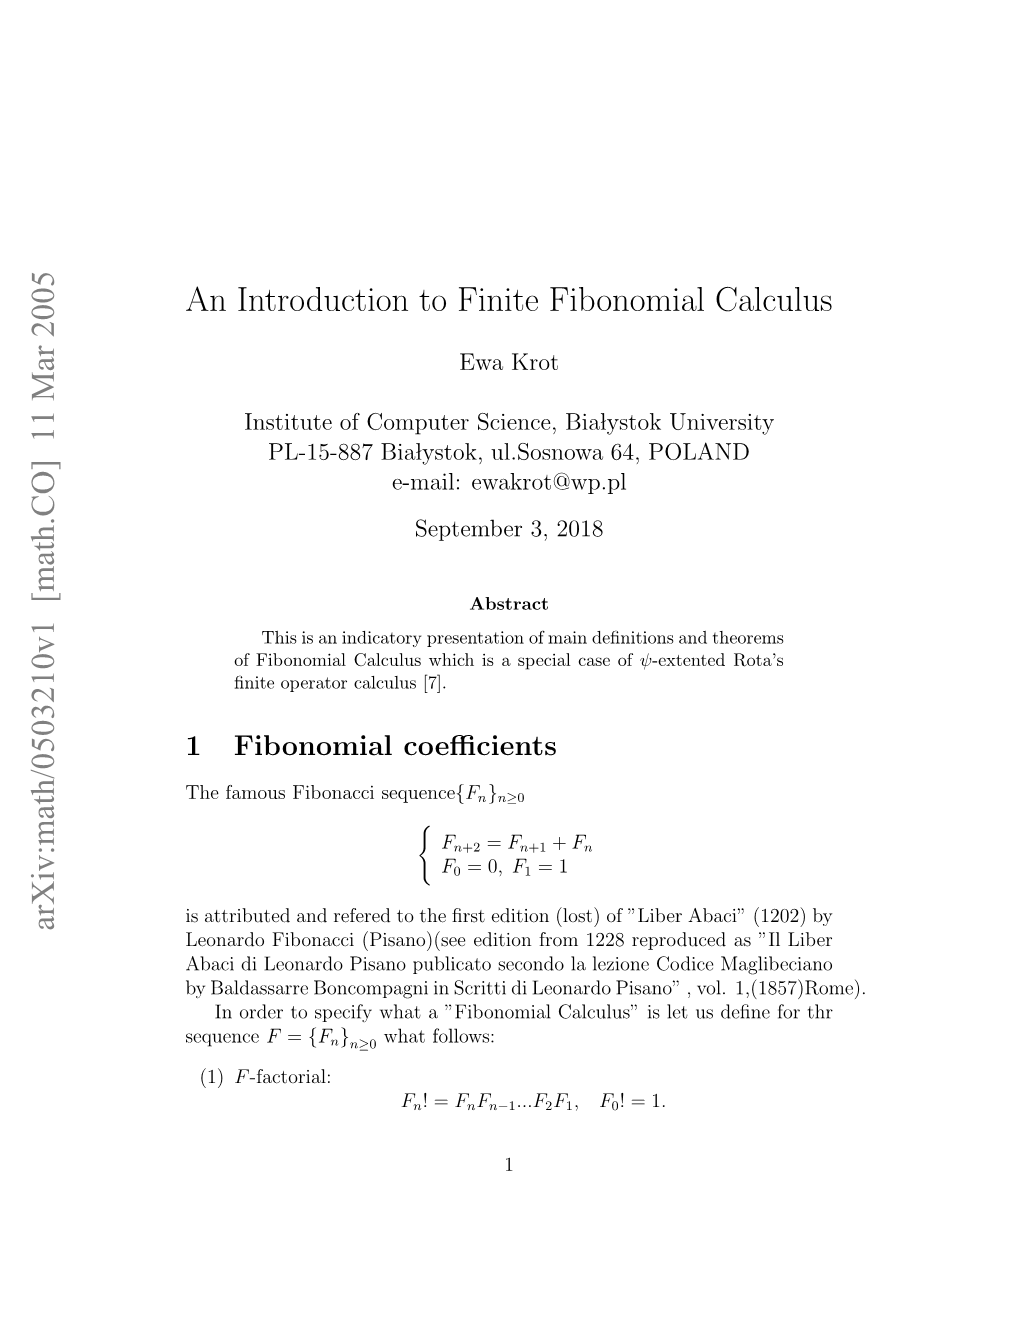 An Introduction to Finite Fibonomial Calculus